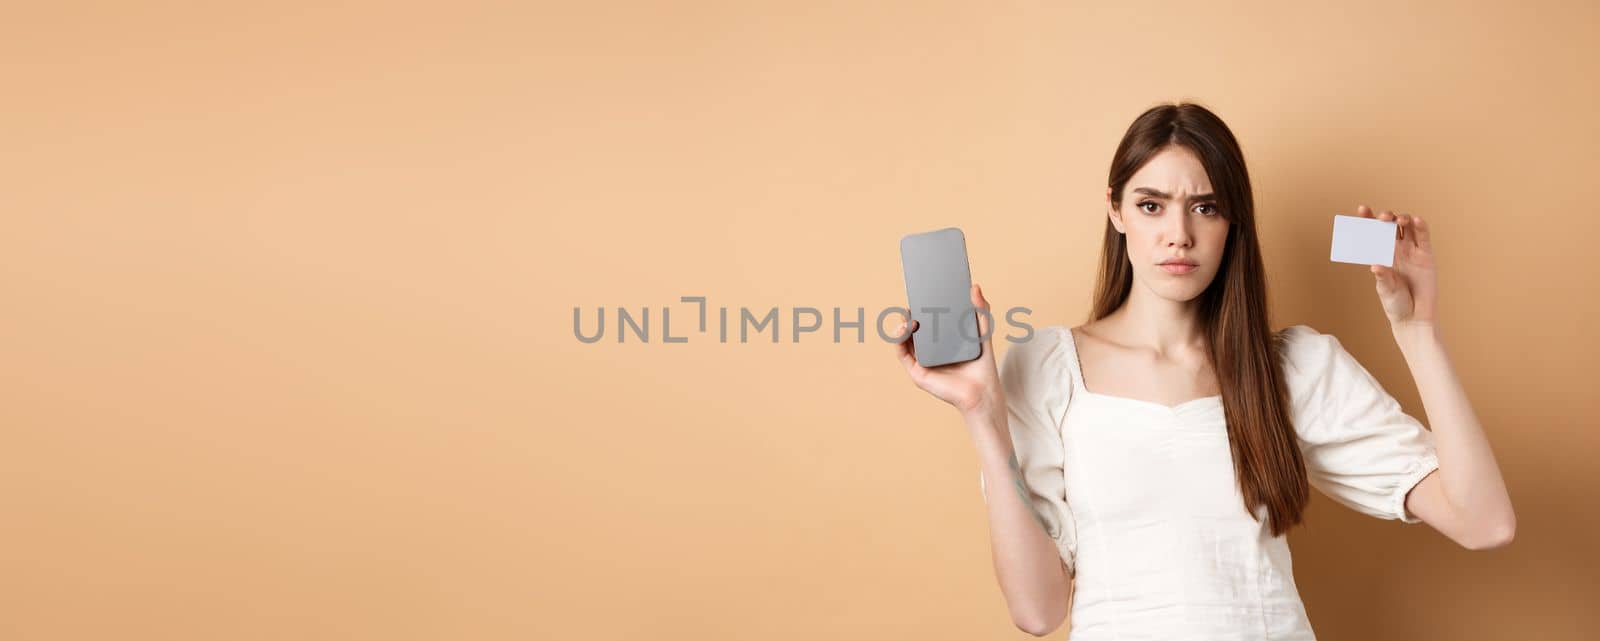 Sad and disappointed girl showing empty smartphone screen and plastic credit card, complaining and frowning, standing on beige background.